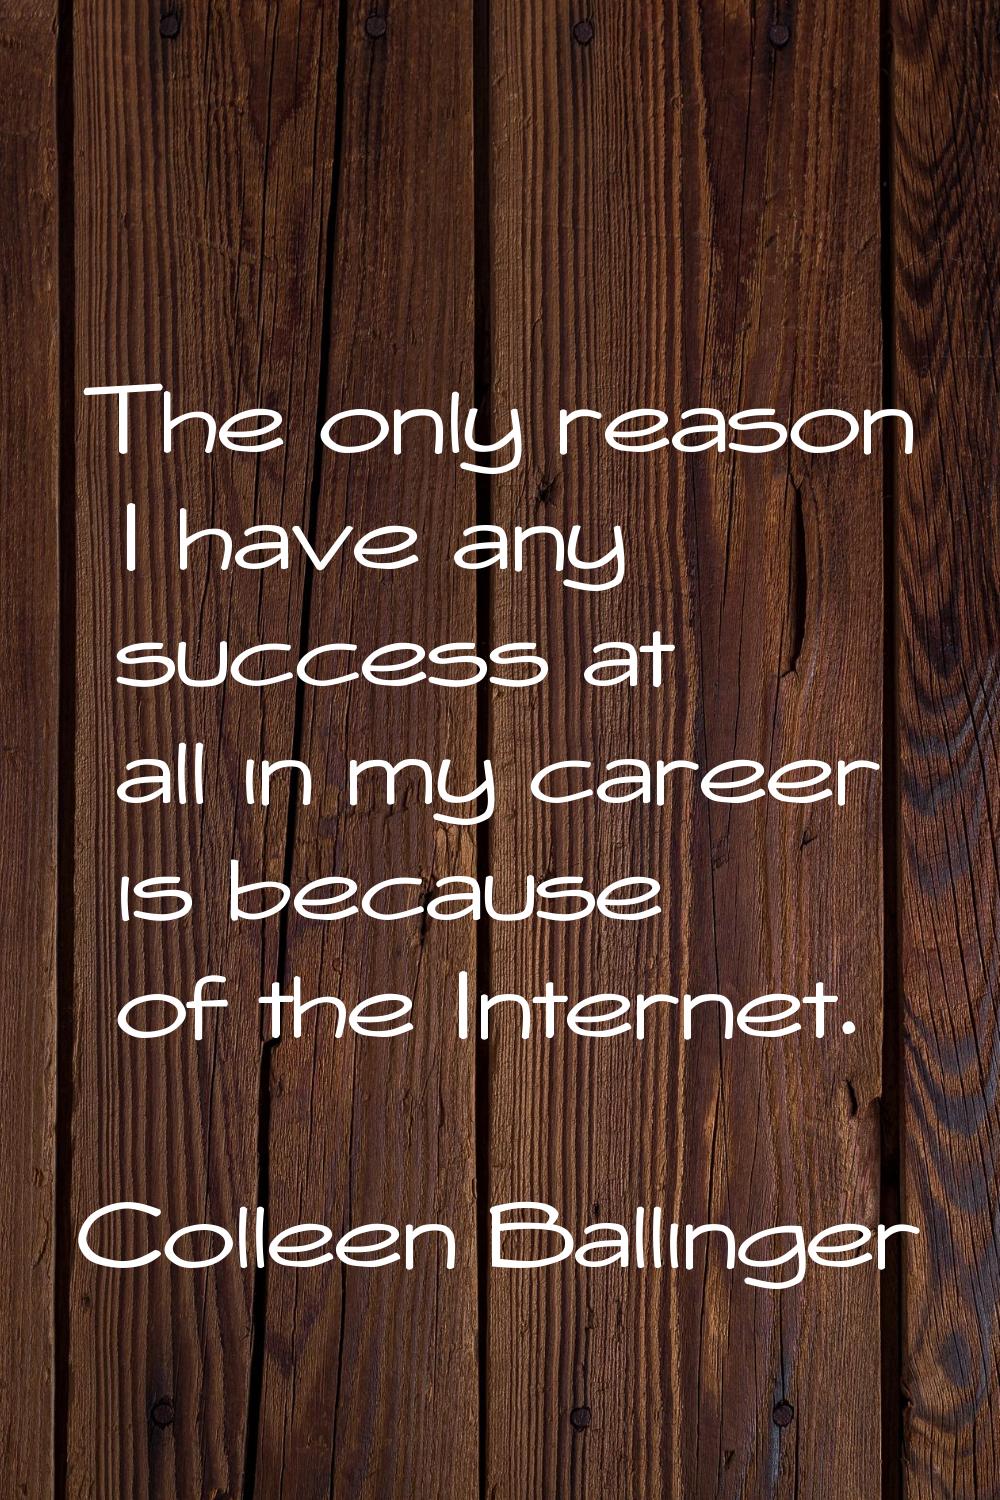 The only reason I have any success at all in my career is because of the Internet.